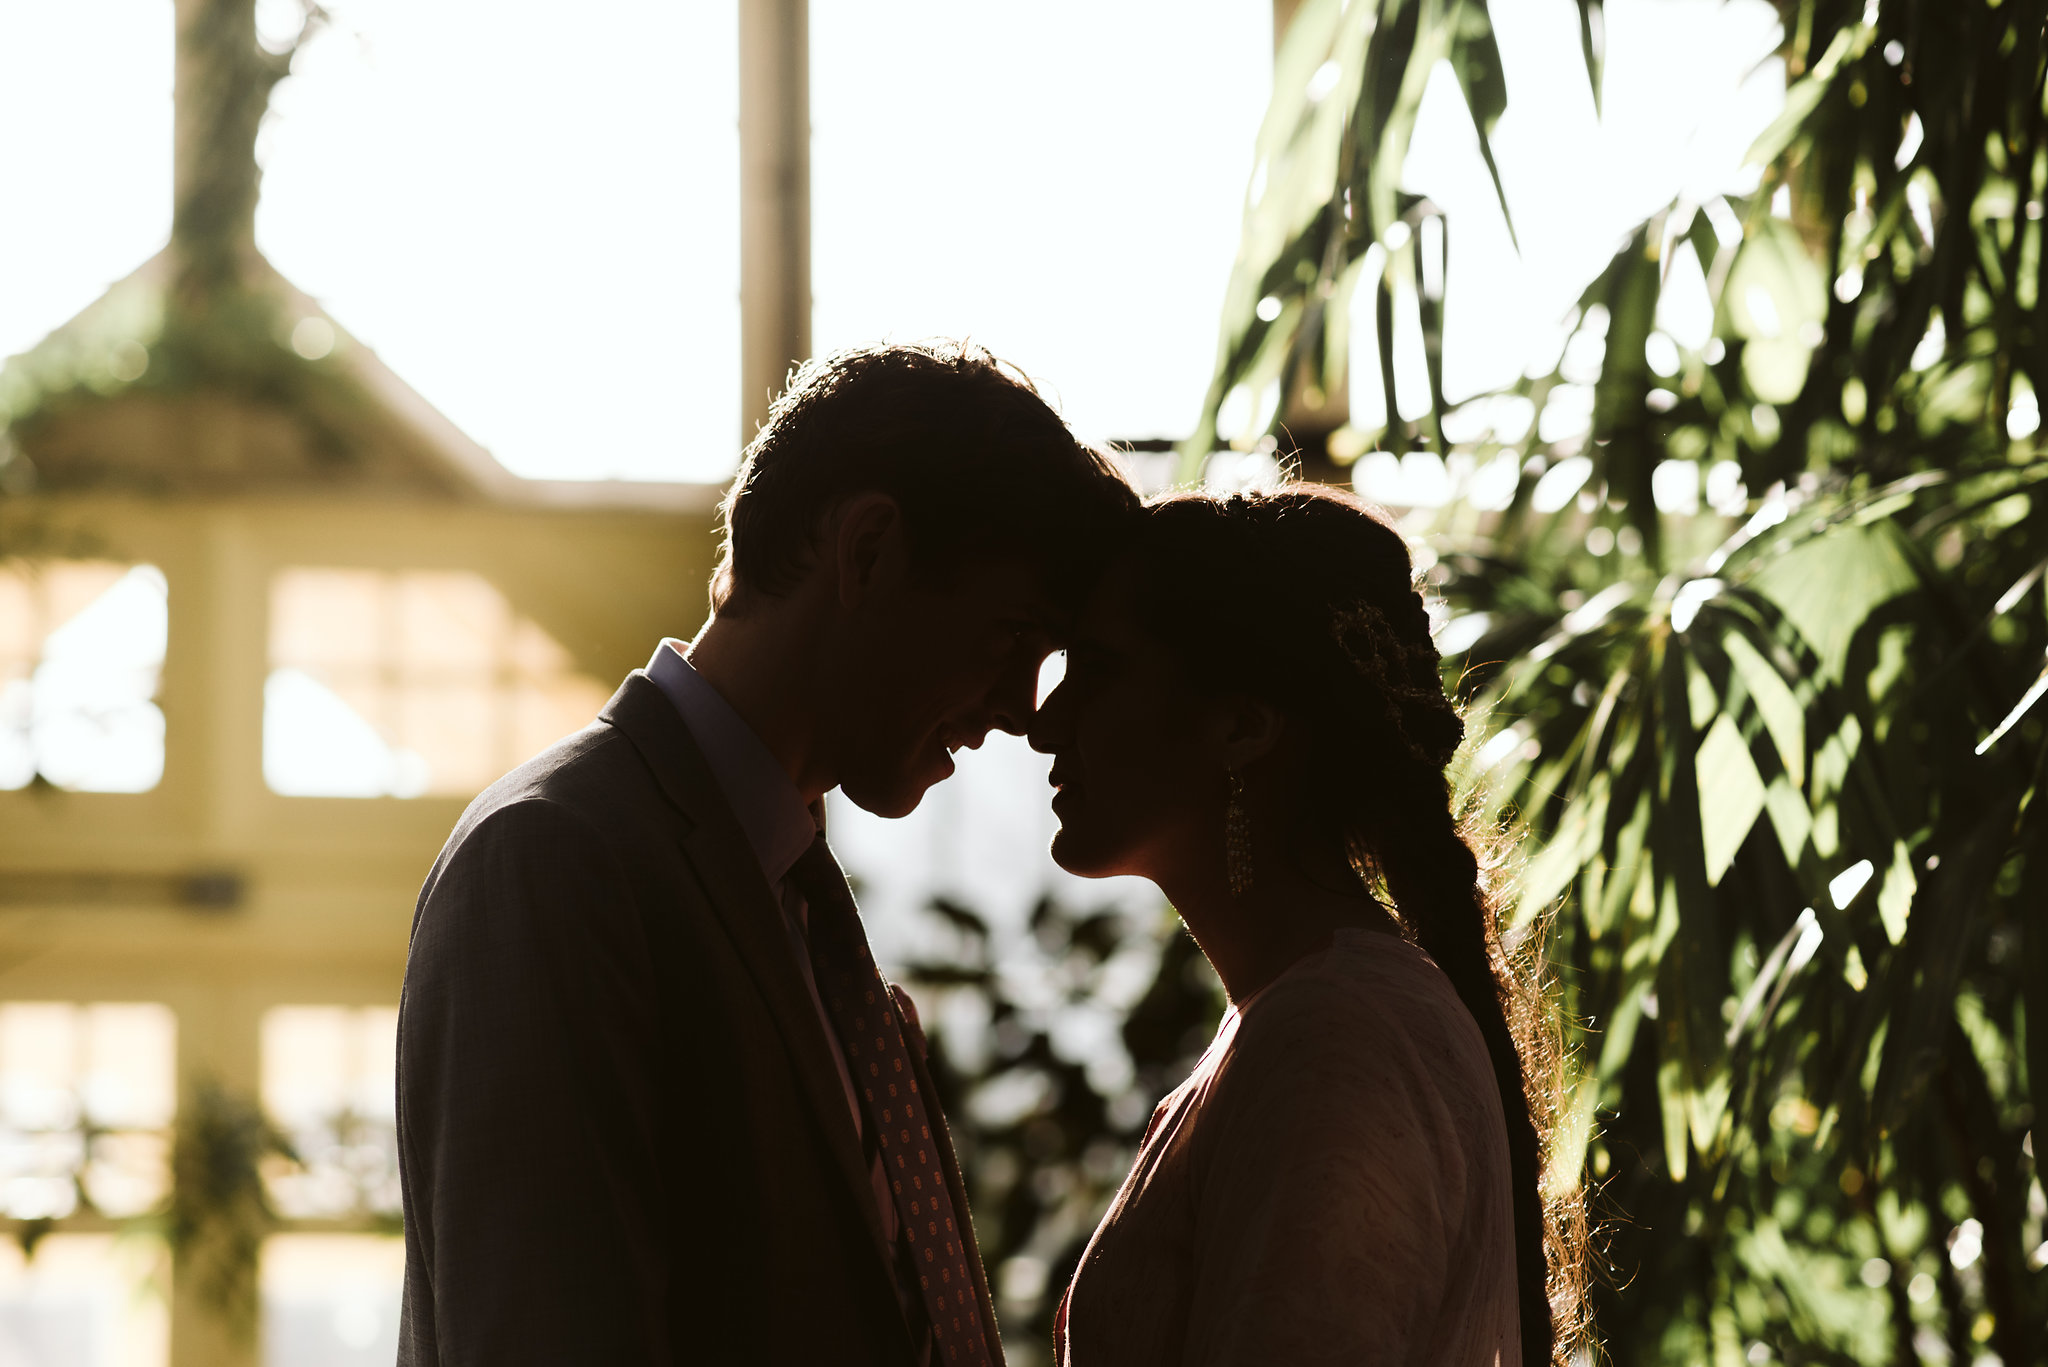 Elopement, Weekday Wedding, Rawlings Conservatory, Greenhouse, Maryland Wedding Photographer, Indian American, Nature, Romantic, Garden, Sweet Moments, Candid Photo, Bride and Groom Silhouette